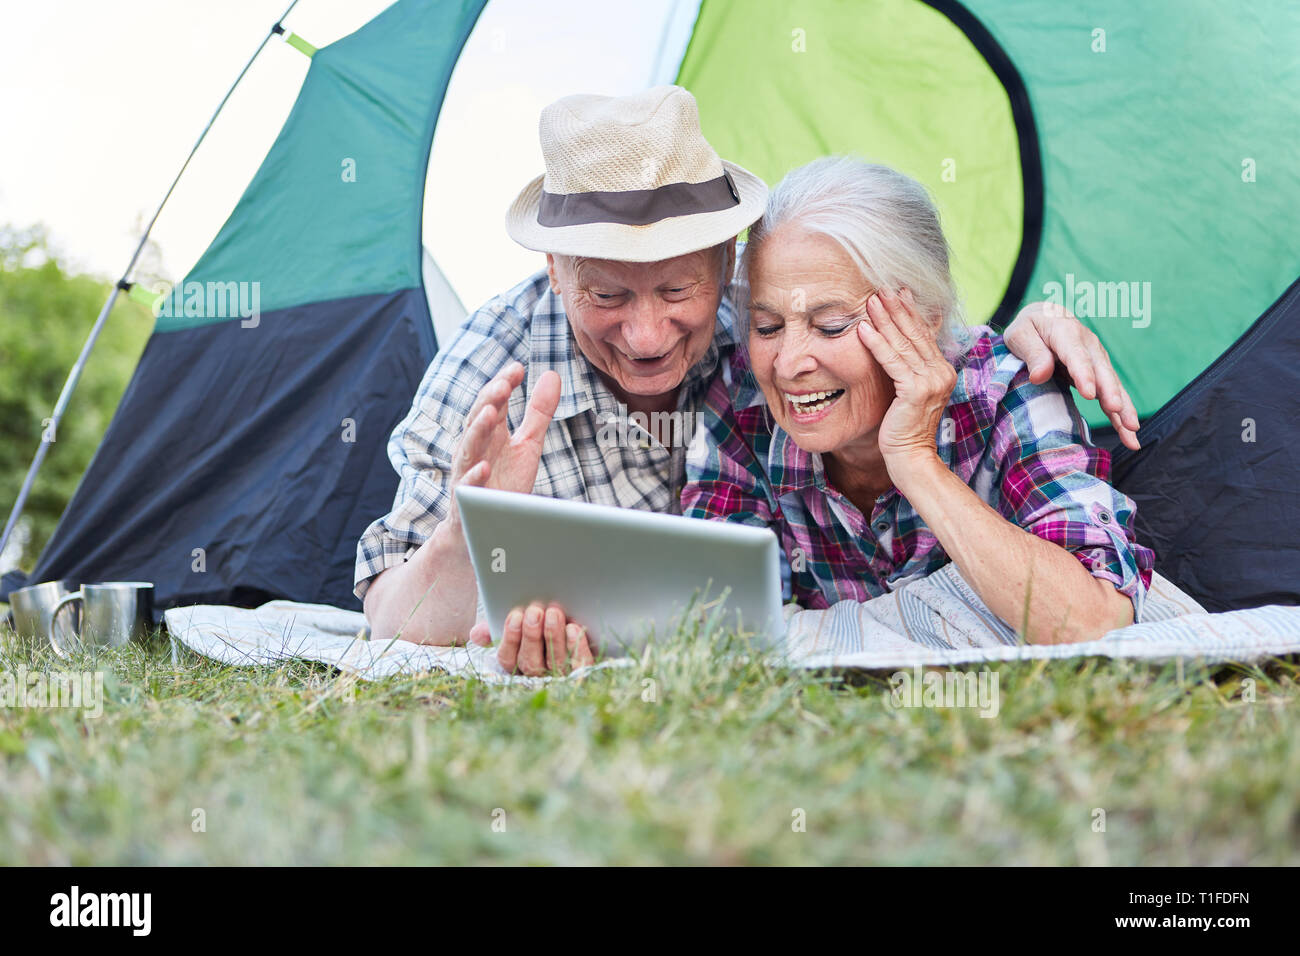 Senior couple having fun at the video chat online with the tablet computer while camping Stock Photo